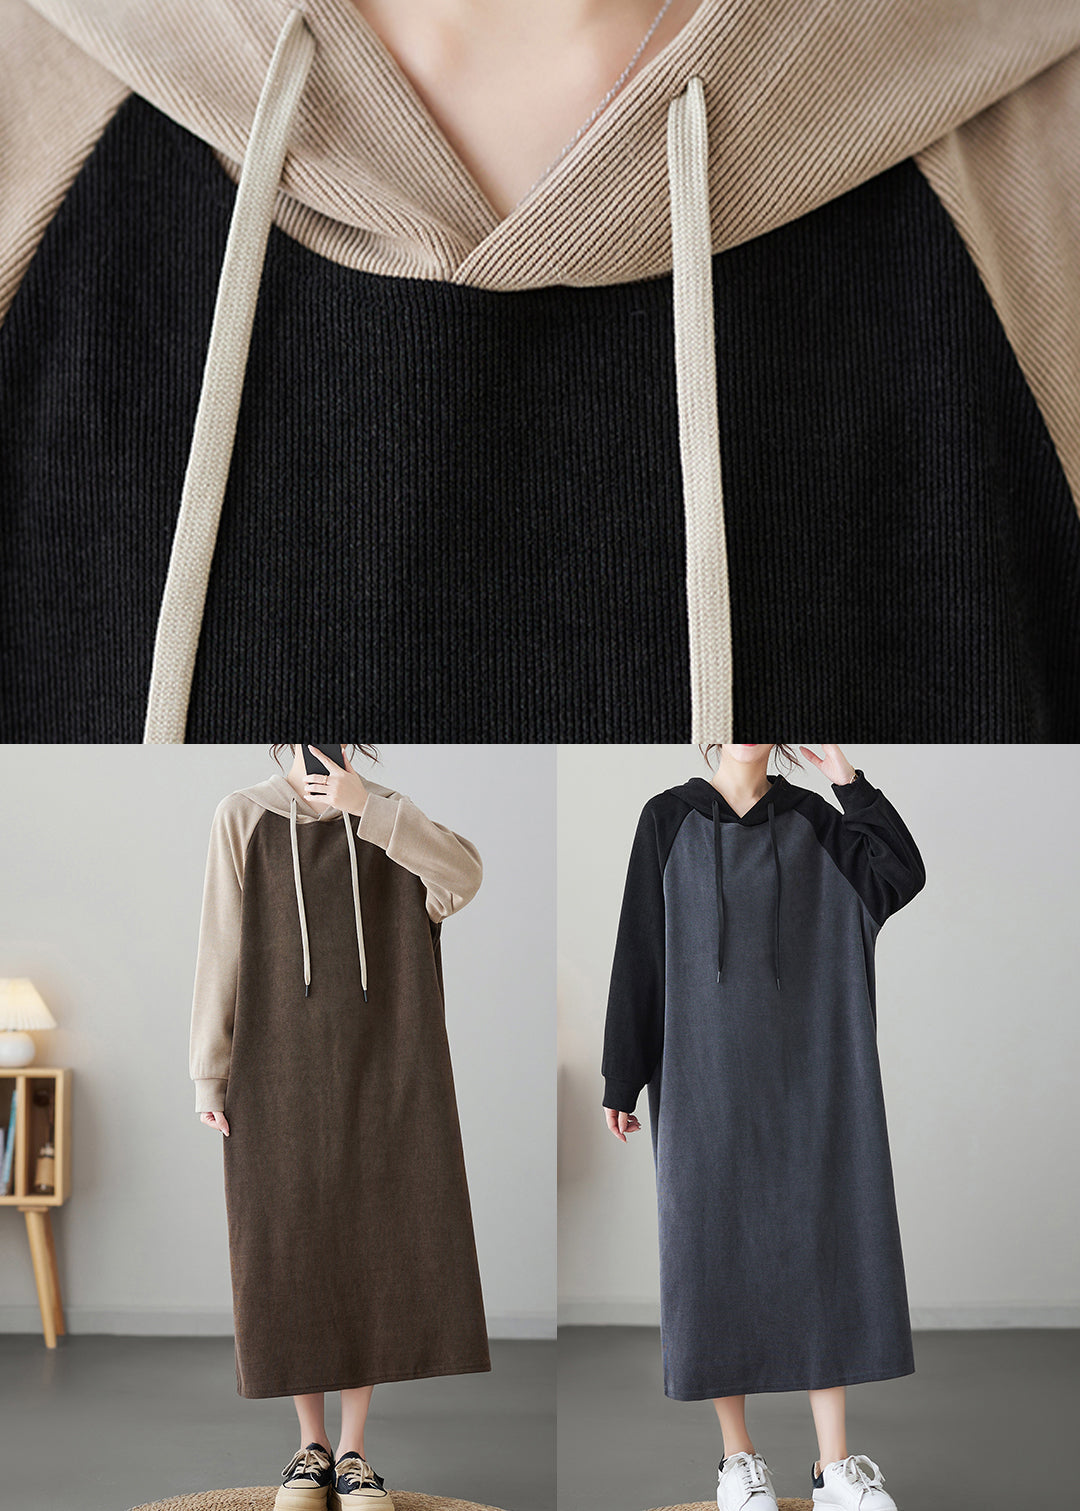 Oversized Trendy Coffee Patchwork Long Hooded Dresses Winter